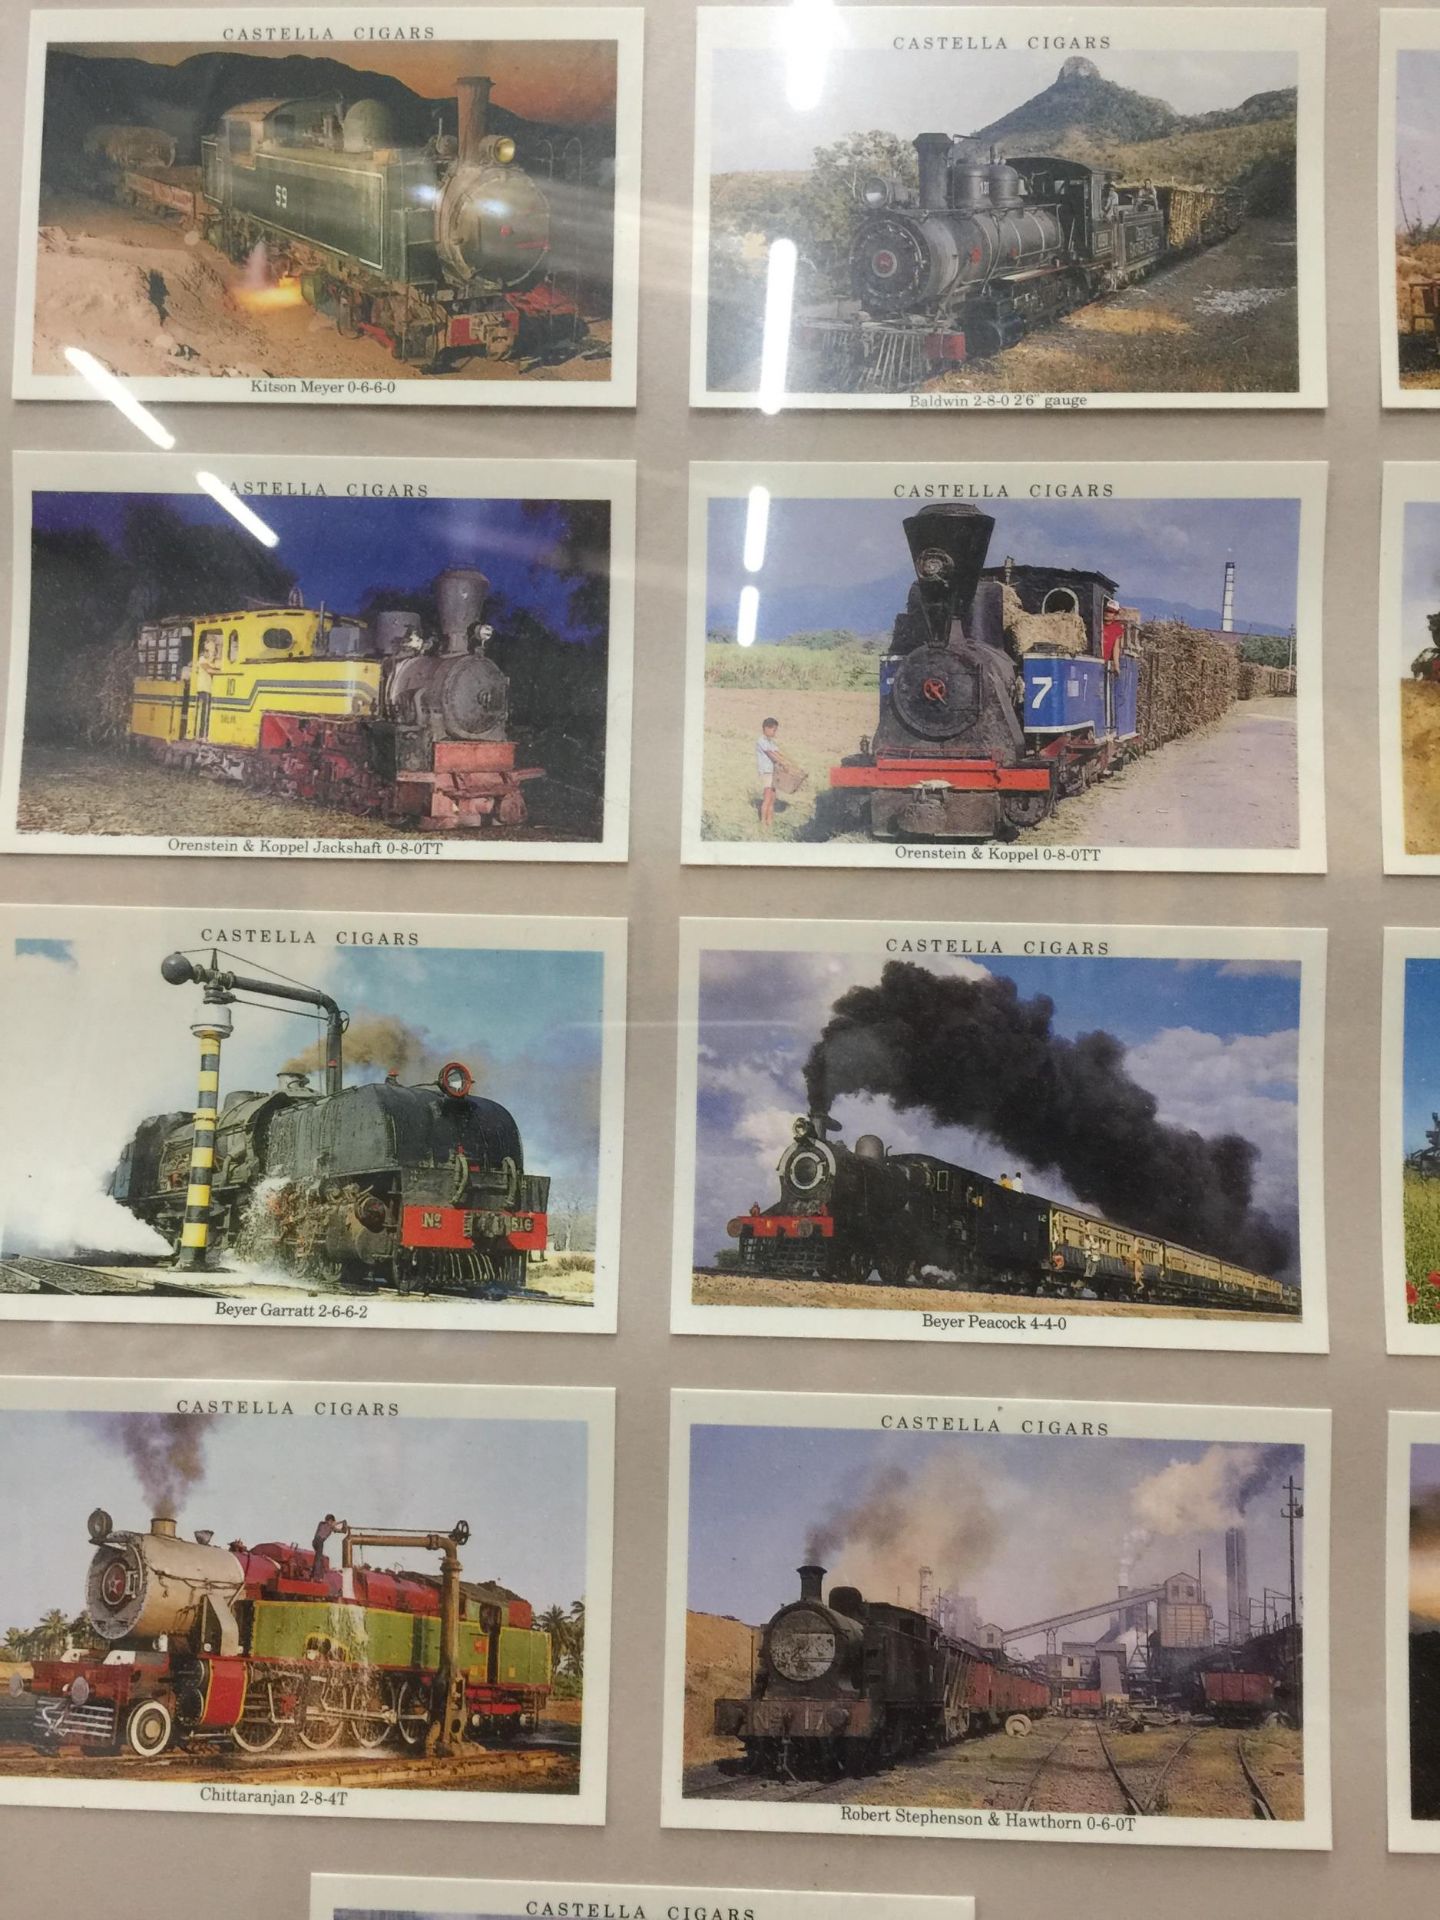 A FRAMED CASTELLA CIGARS STEAM ENGINE PICTURE CARD MONTAGE - Image 4 of 4